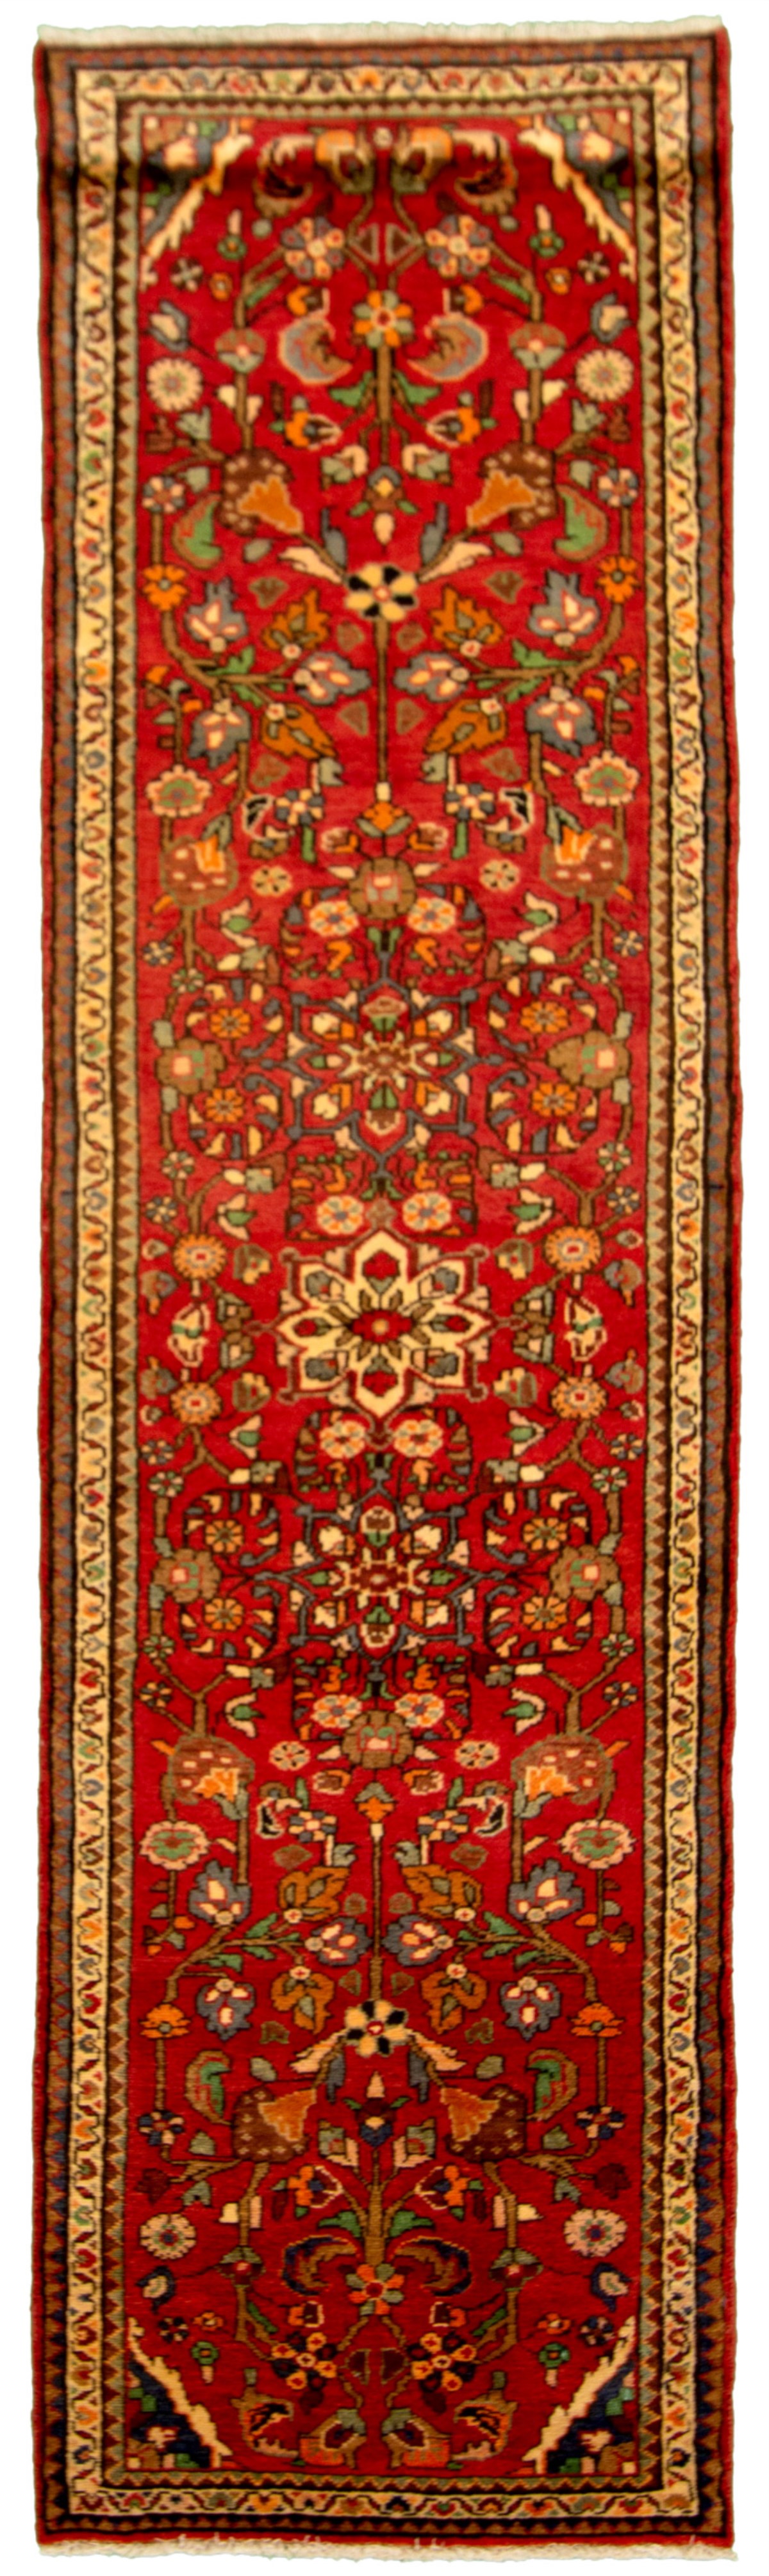 Hand-knotted Hosseinabad Red Wool Rug 2'8" x 9'9"  Size: 2'7" x 9'9"  